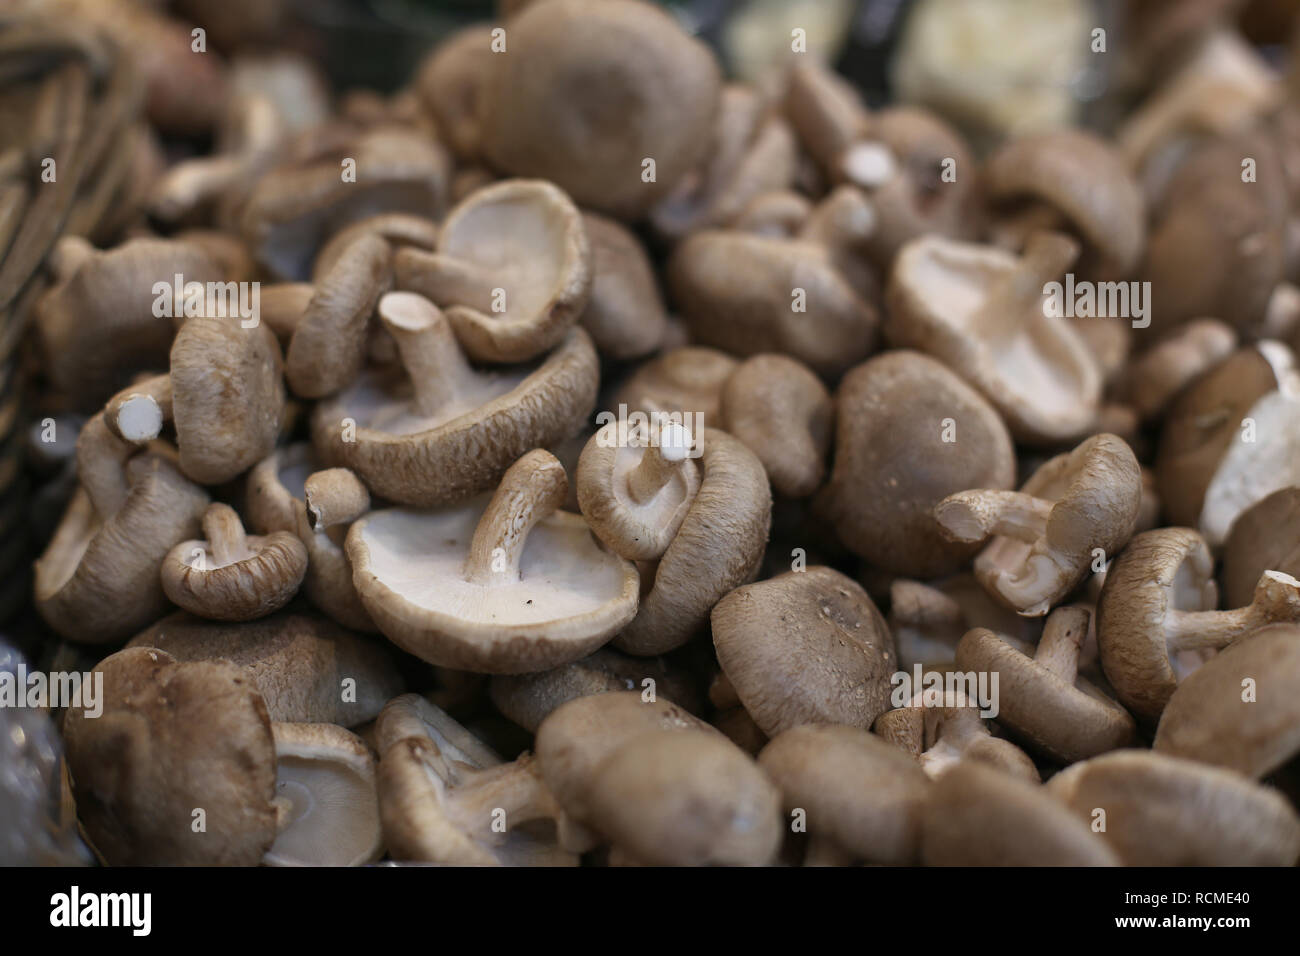 Shiitake mushrooms background fresh vegetables. Japanese traditional food and herbs. Stock Photo